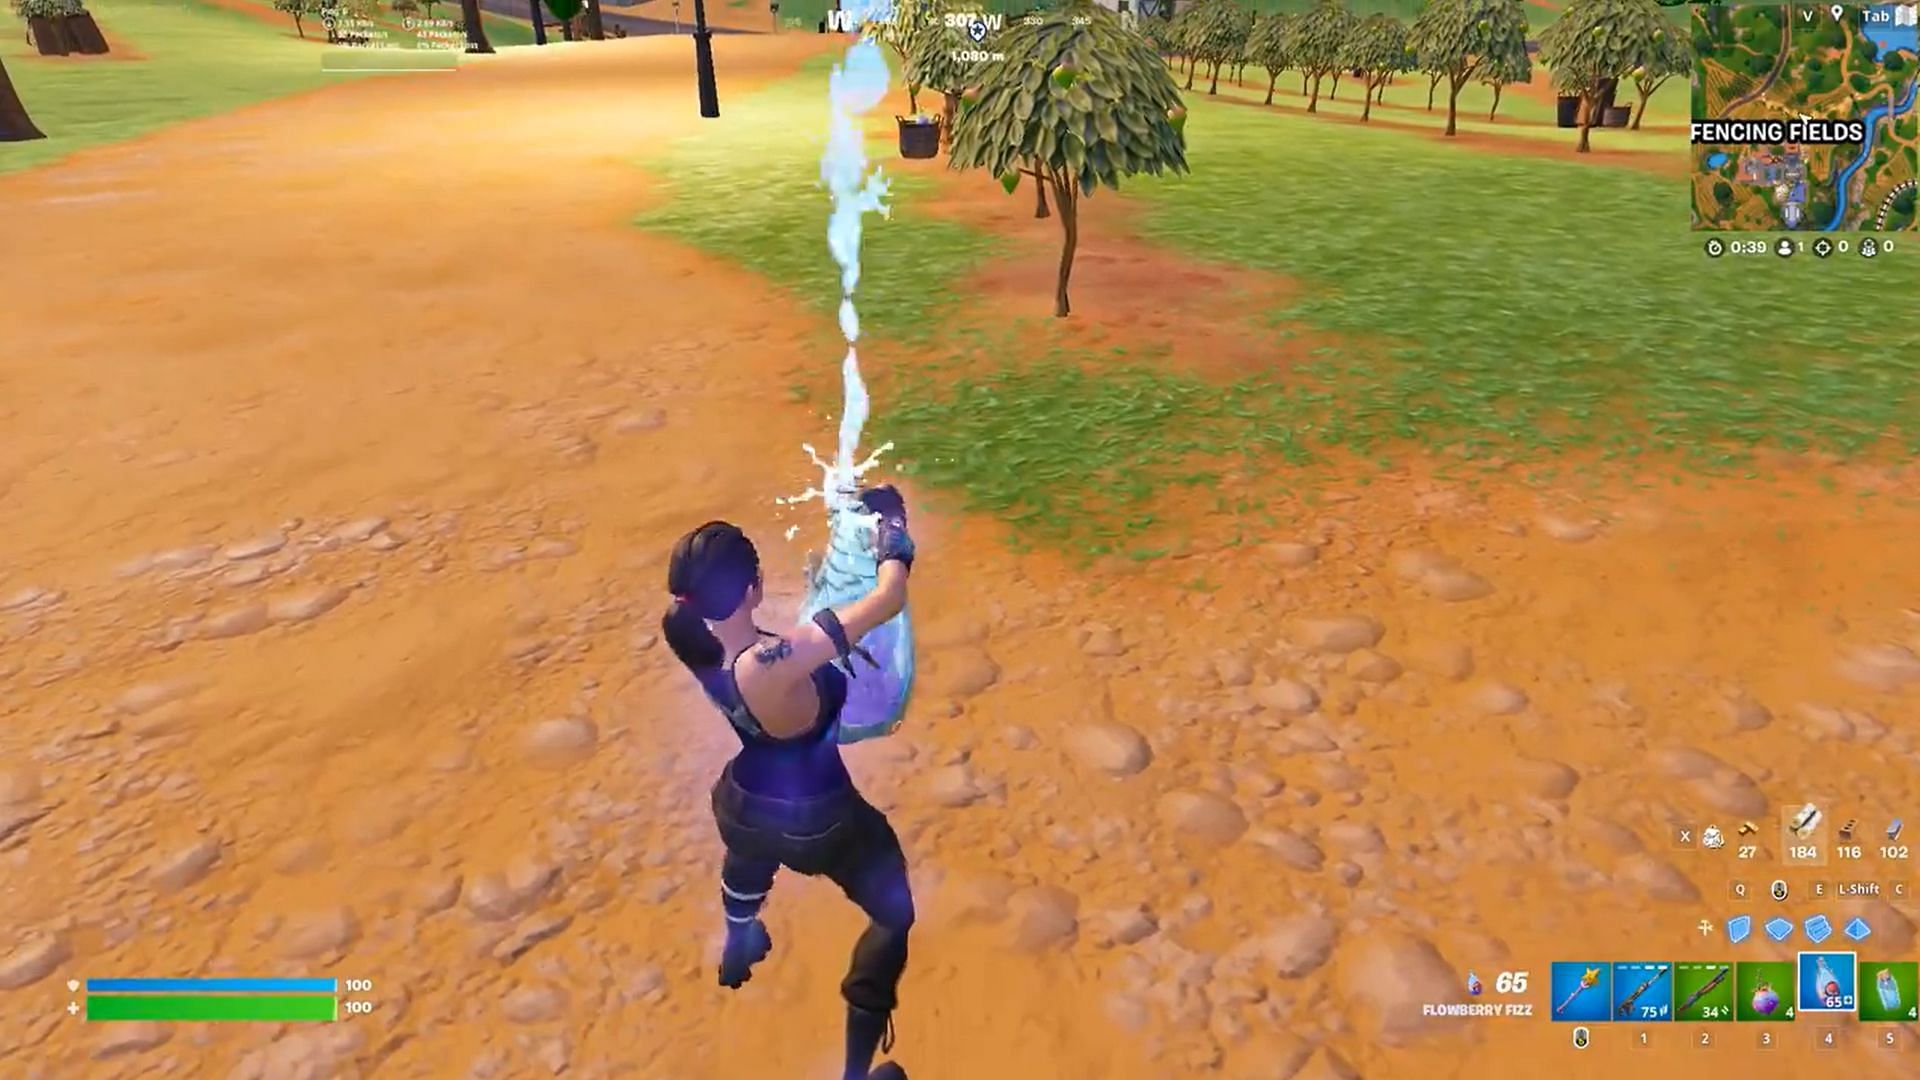 Flowberry Fizz animation in Fortnite has sparked controversy online